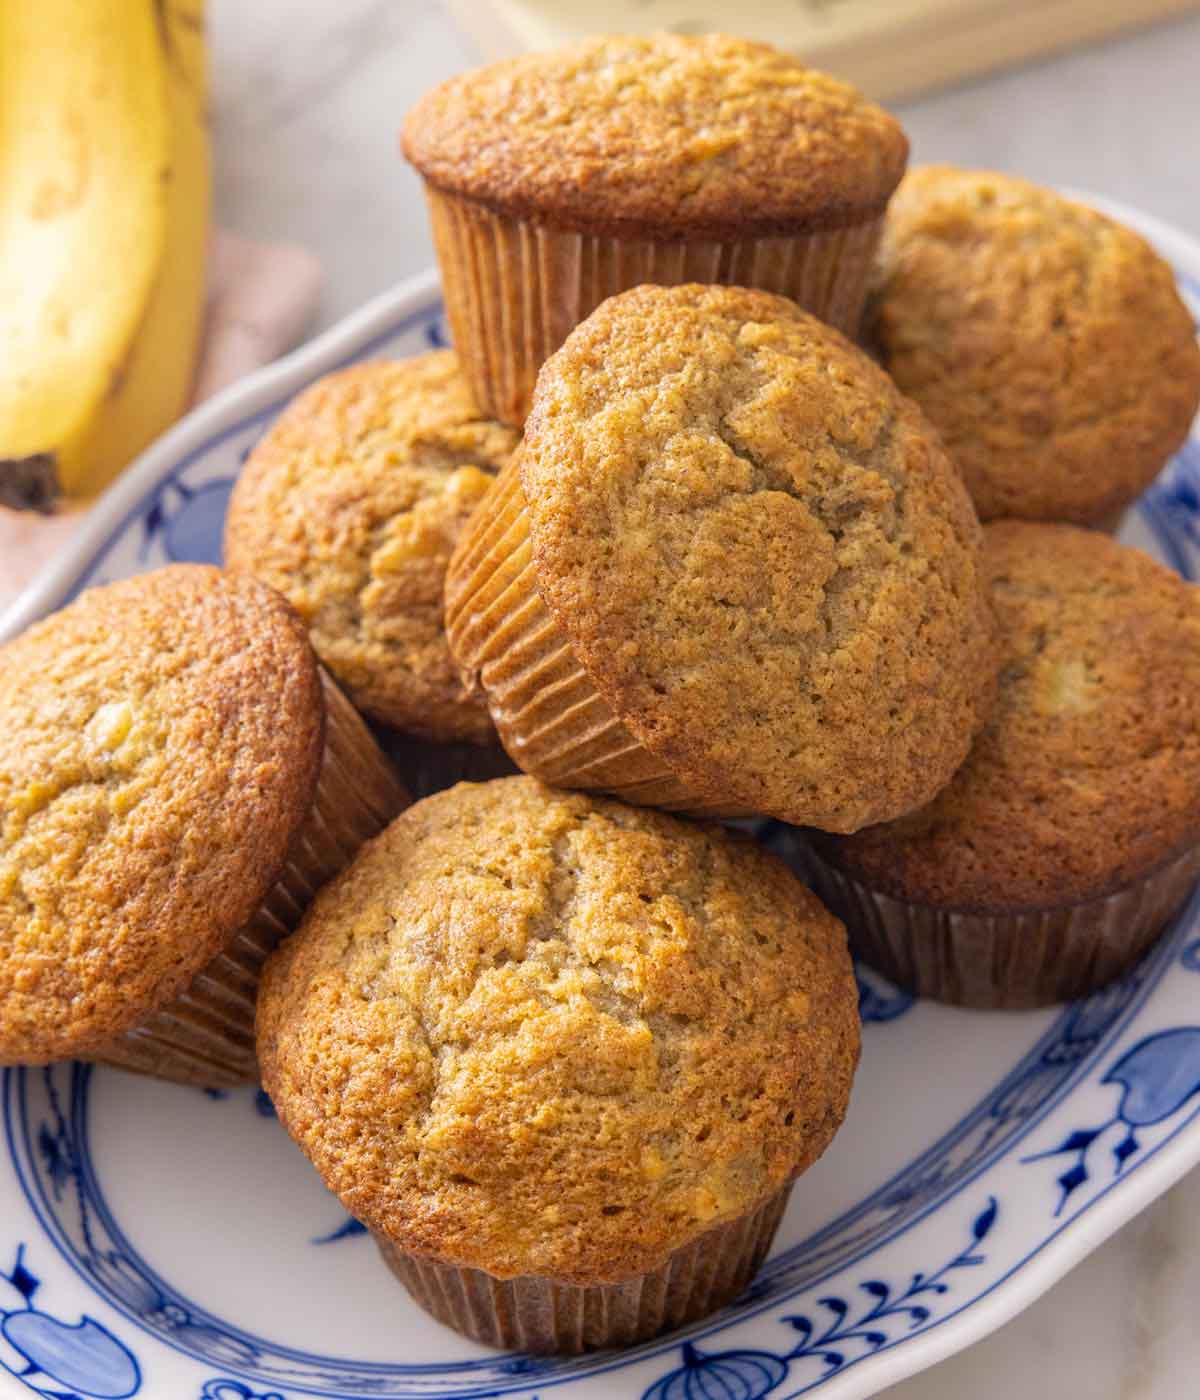 A platter with a pile of banana muffins.